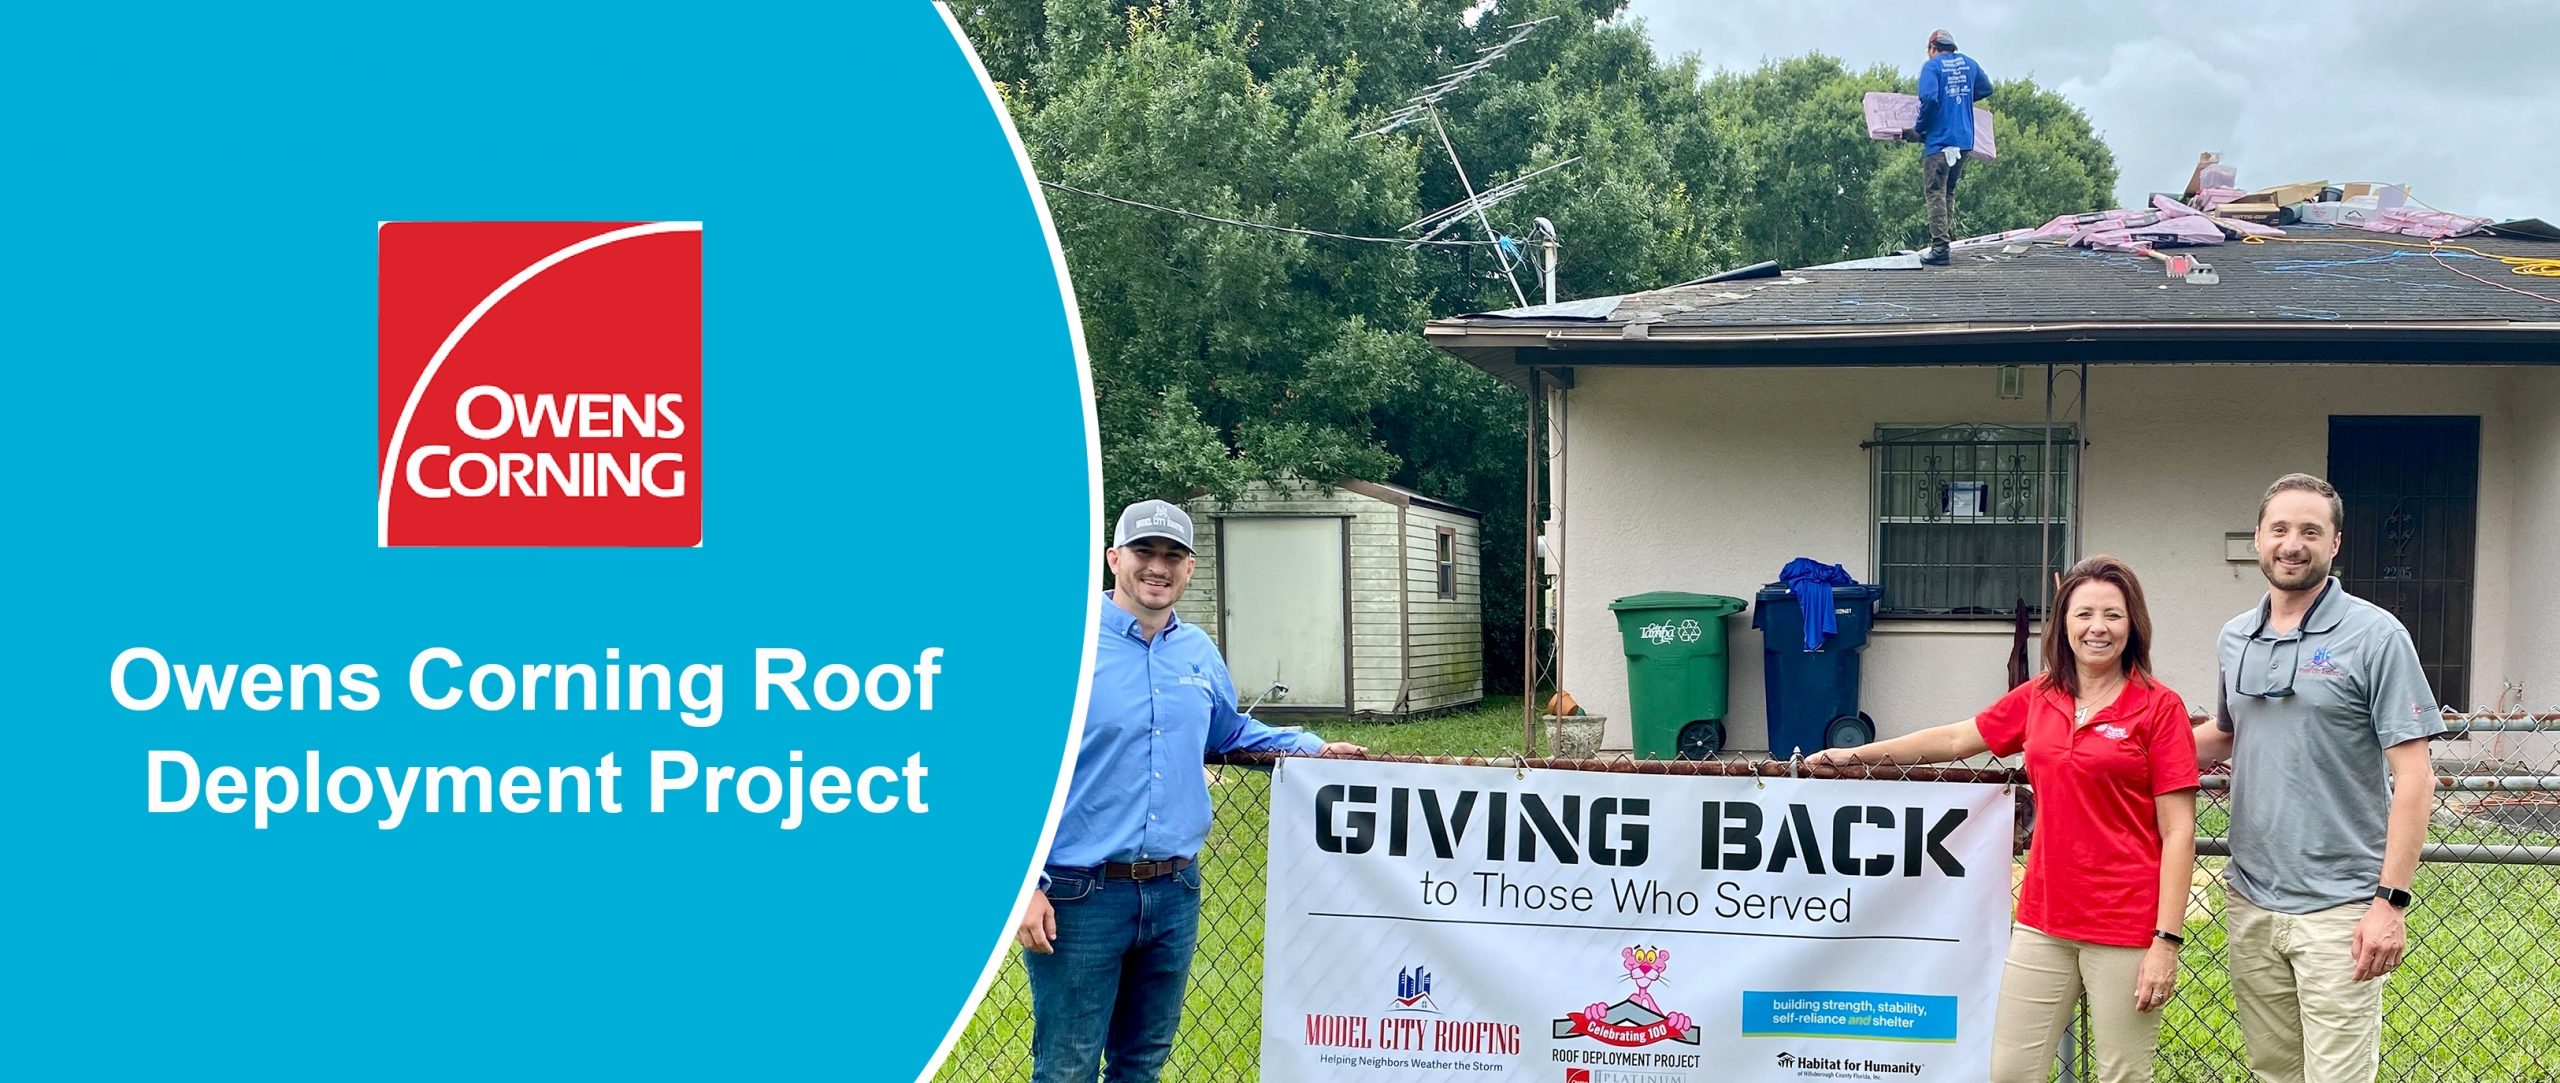 Six Hillsborough Vets Received New Roofs Through Owens Corning